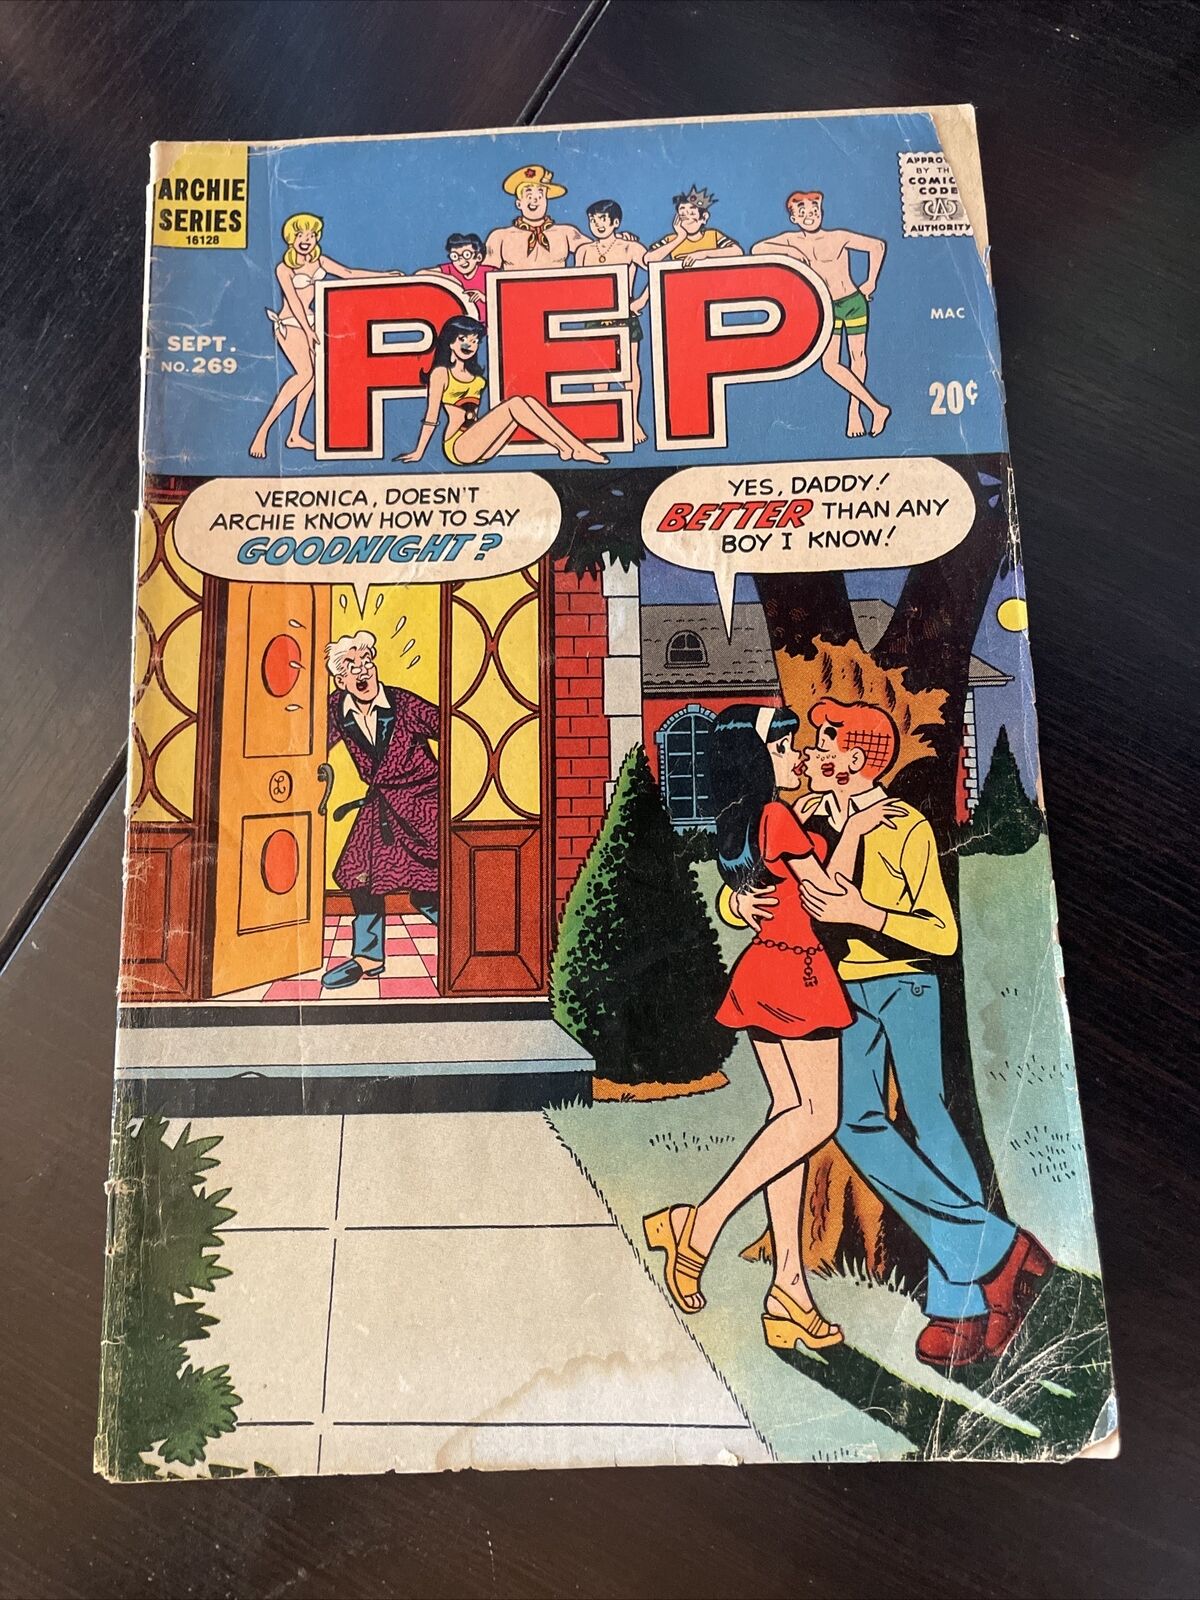 Archie Series, September Issue 269, 1972 PEP